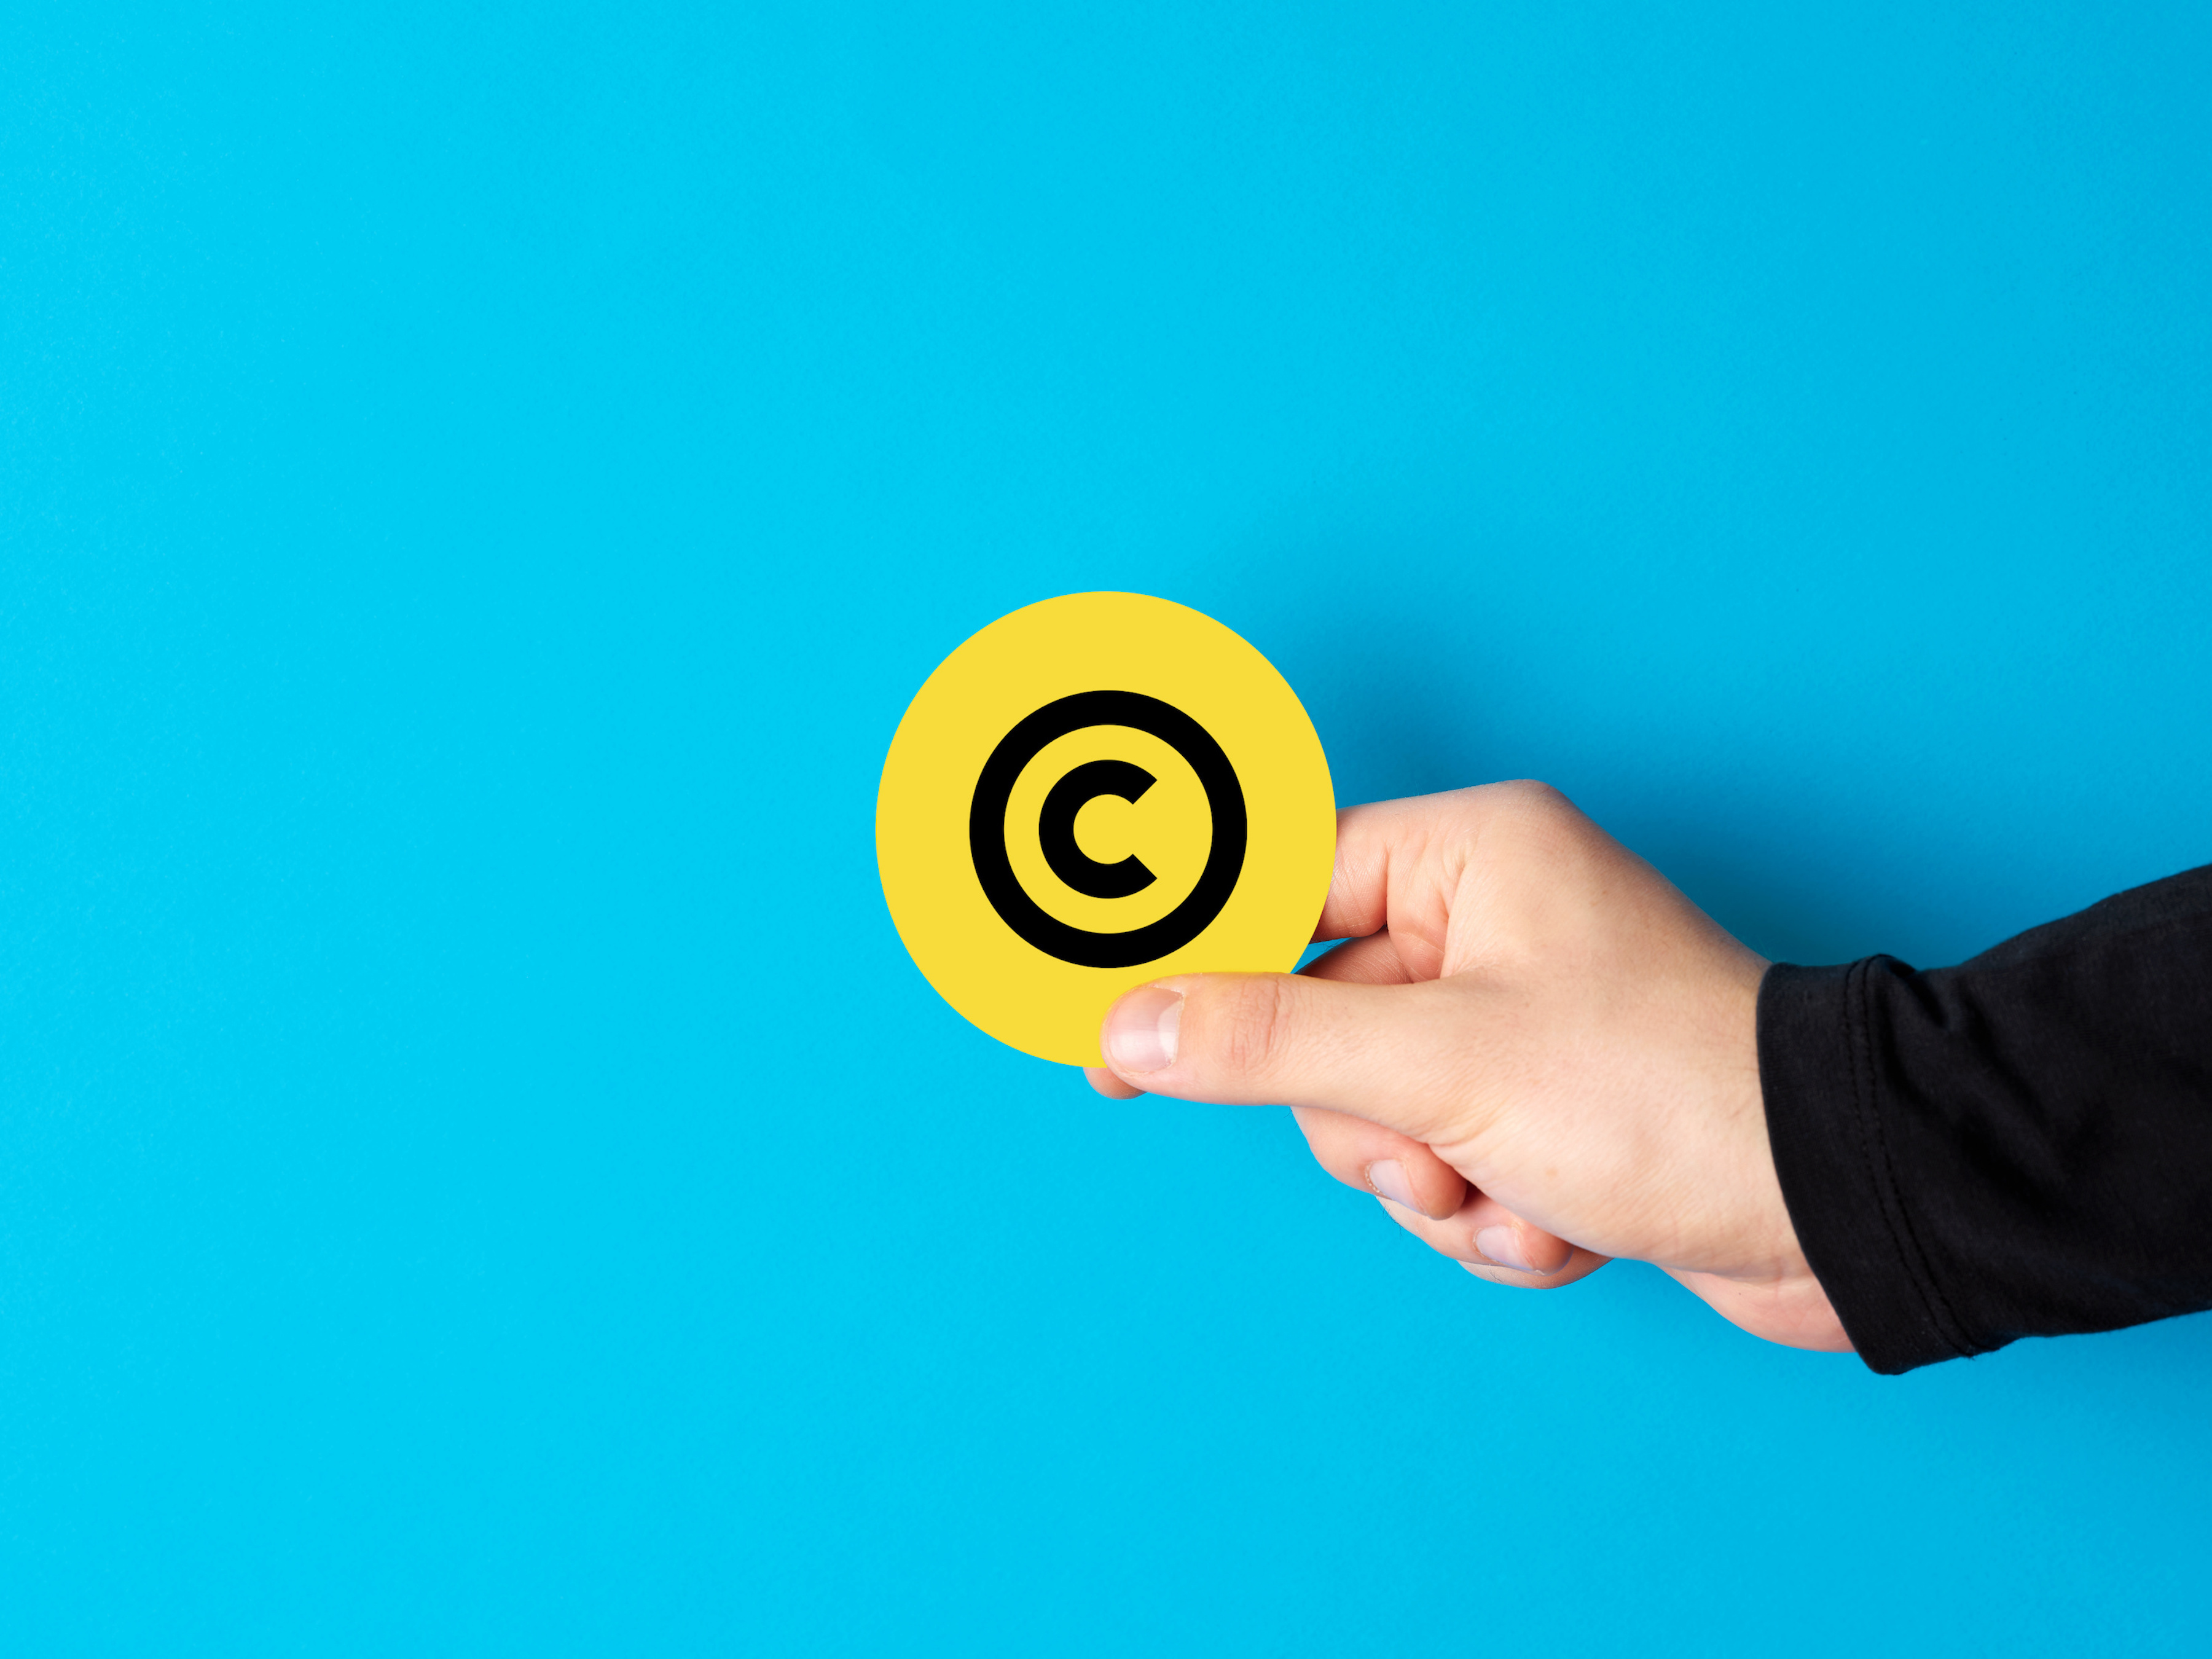 A hand reaches out, holding a yellow circle with the copyright sign.